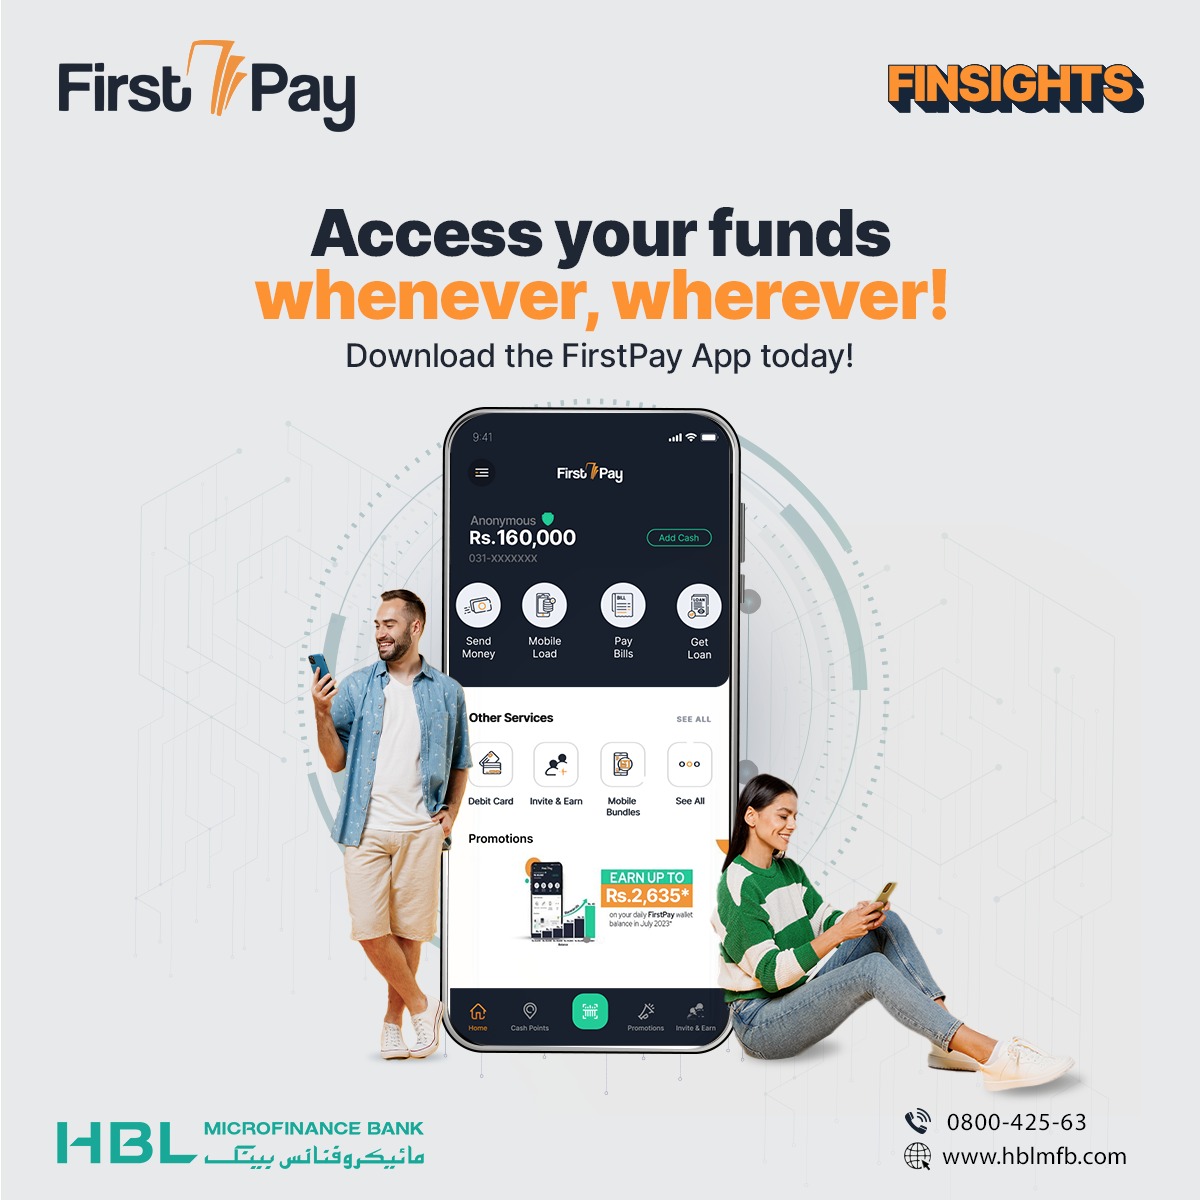 Empower your financial freedom!
Take the charge, access and manage your funds anytime, anywhere with the FirstPay App.

Download Now:
onelink.to/hblmfbfp

#FirstPay #Finsights #FinancialAccessibility #DigitalWallet